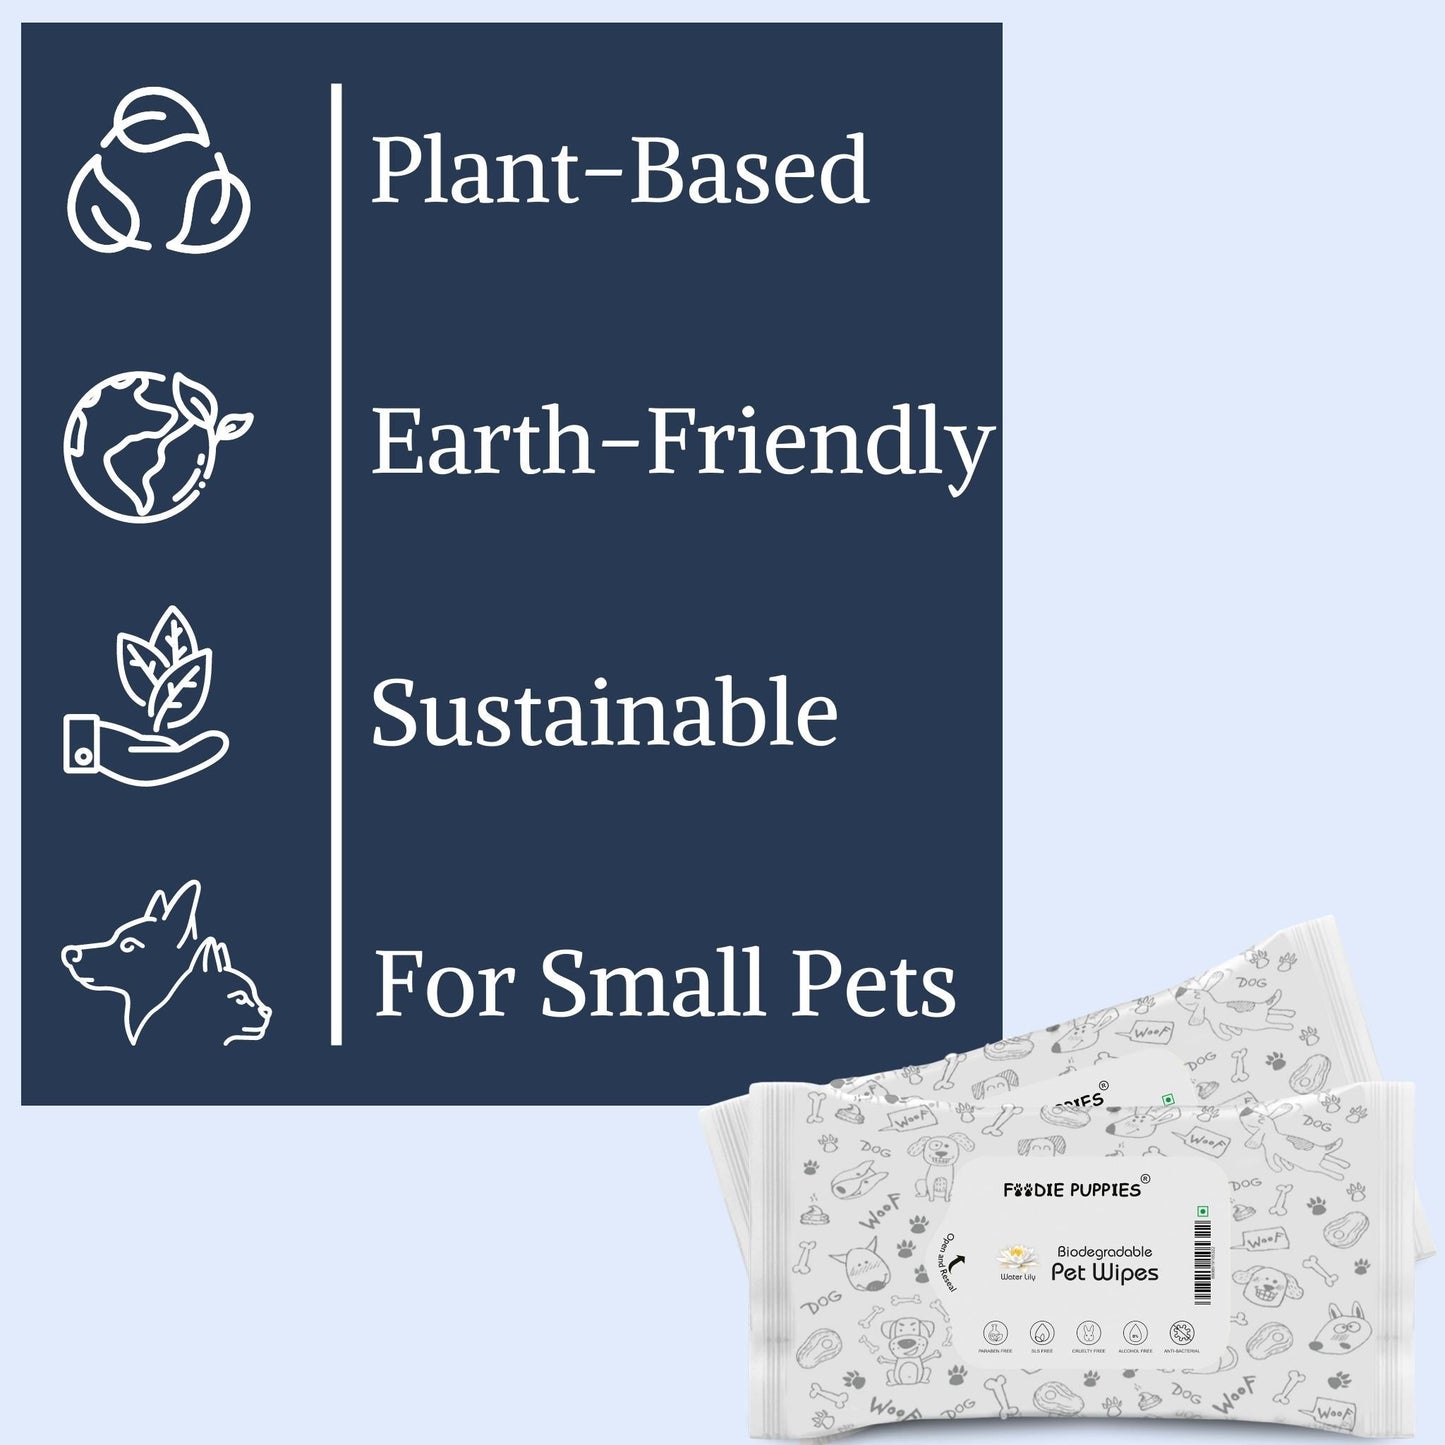 Foodie Puppies Biodegradable Water Lily Pet Wet Wipes 10 Pulls, Pack of 9